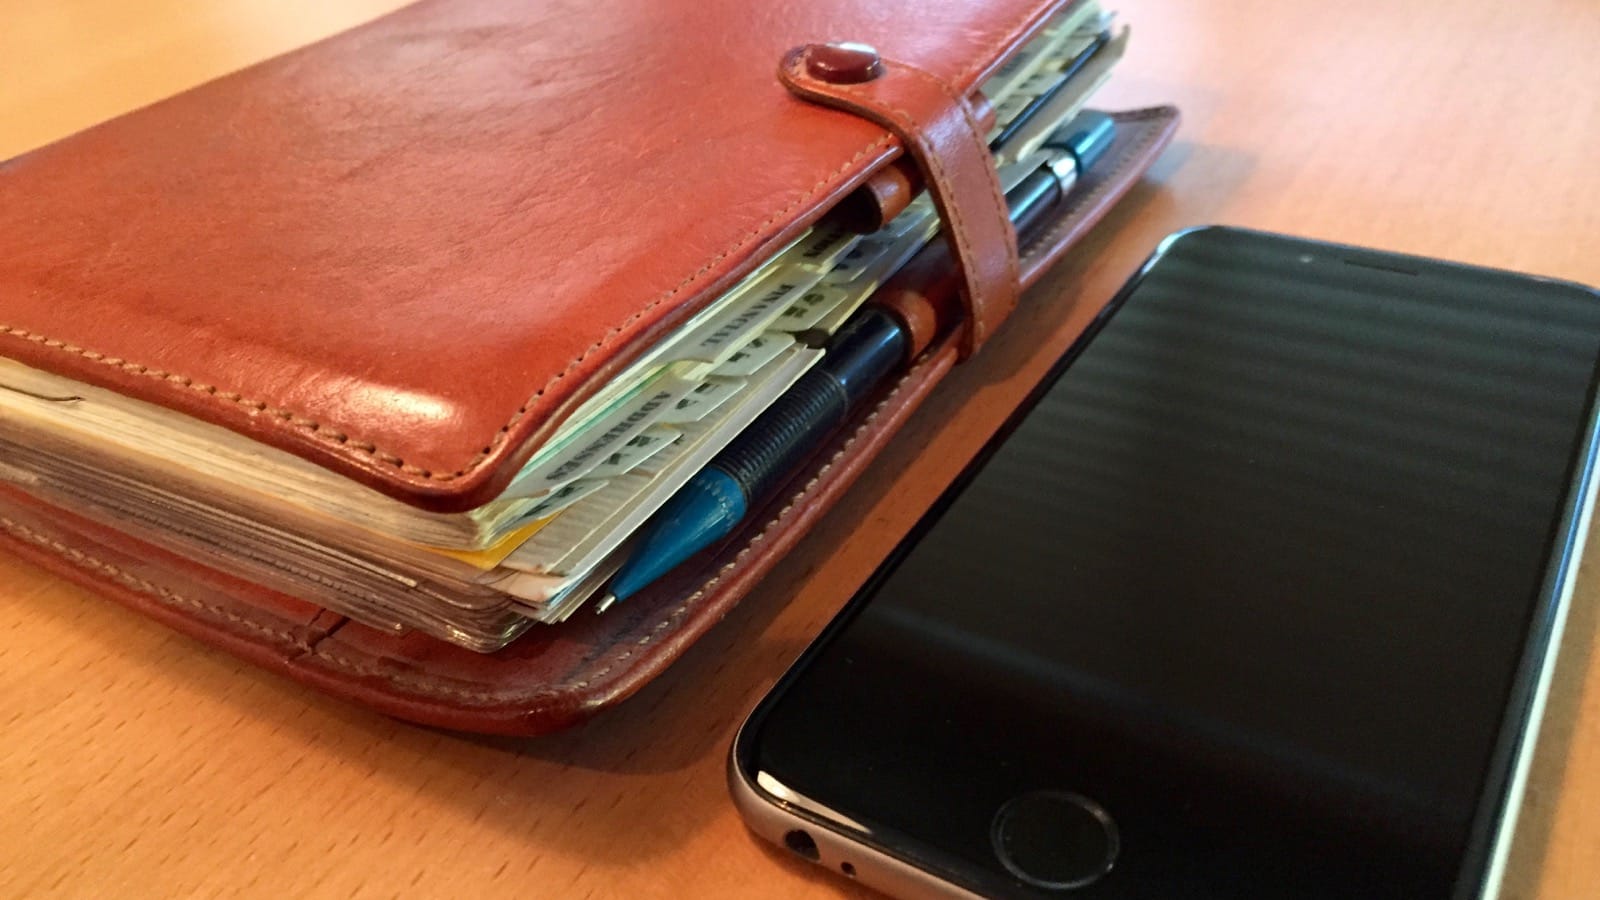 The Filofax I used to run my life for a decade. iPhone 6 for scale.